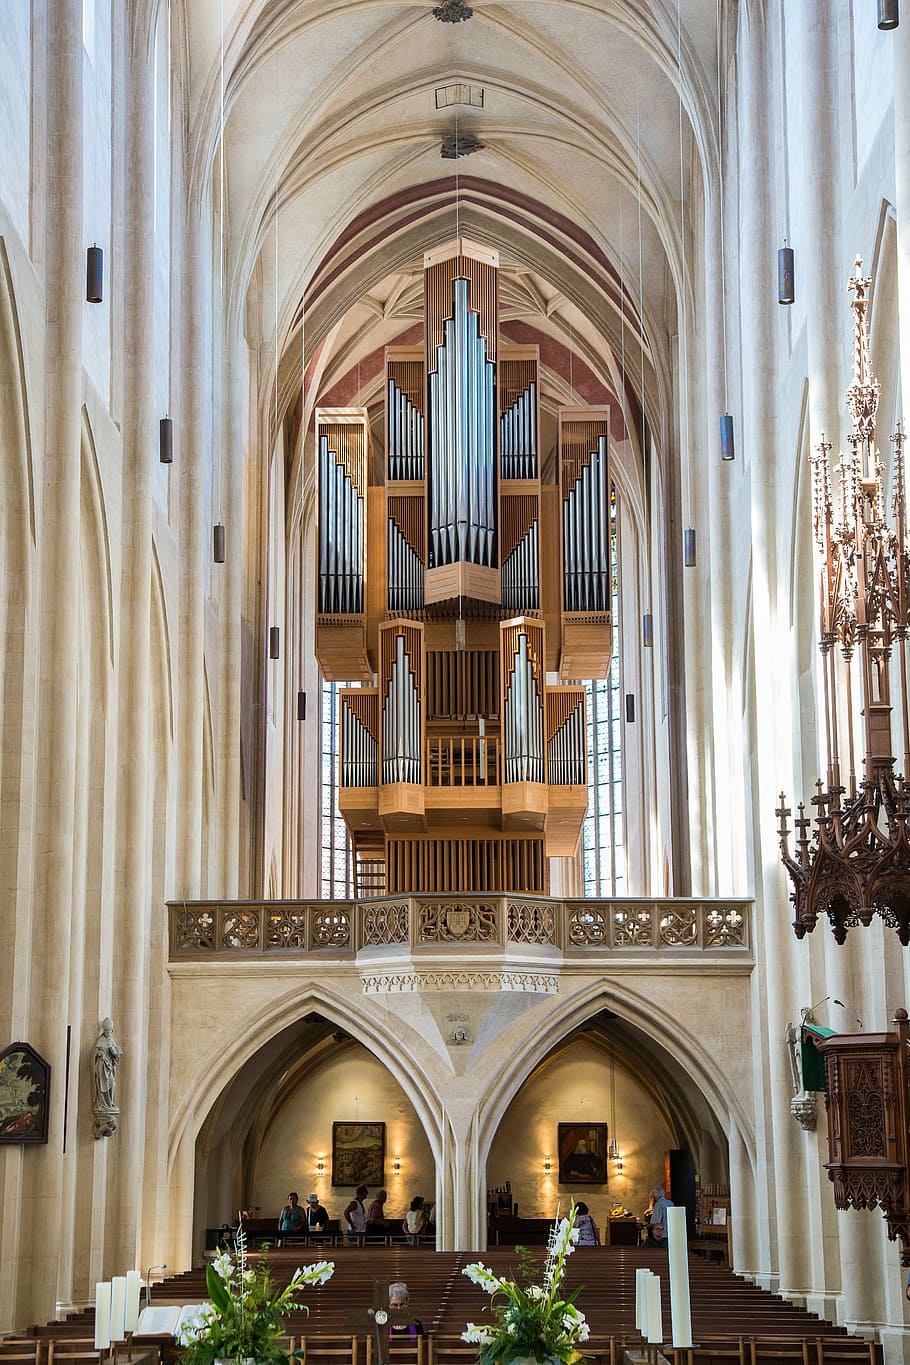 rothenburg of the deaf, rothenburg, st jacob, city church, organ, church, cathedral, architecture, christianity, religion